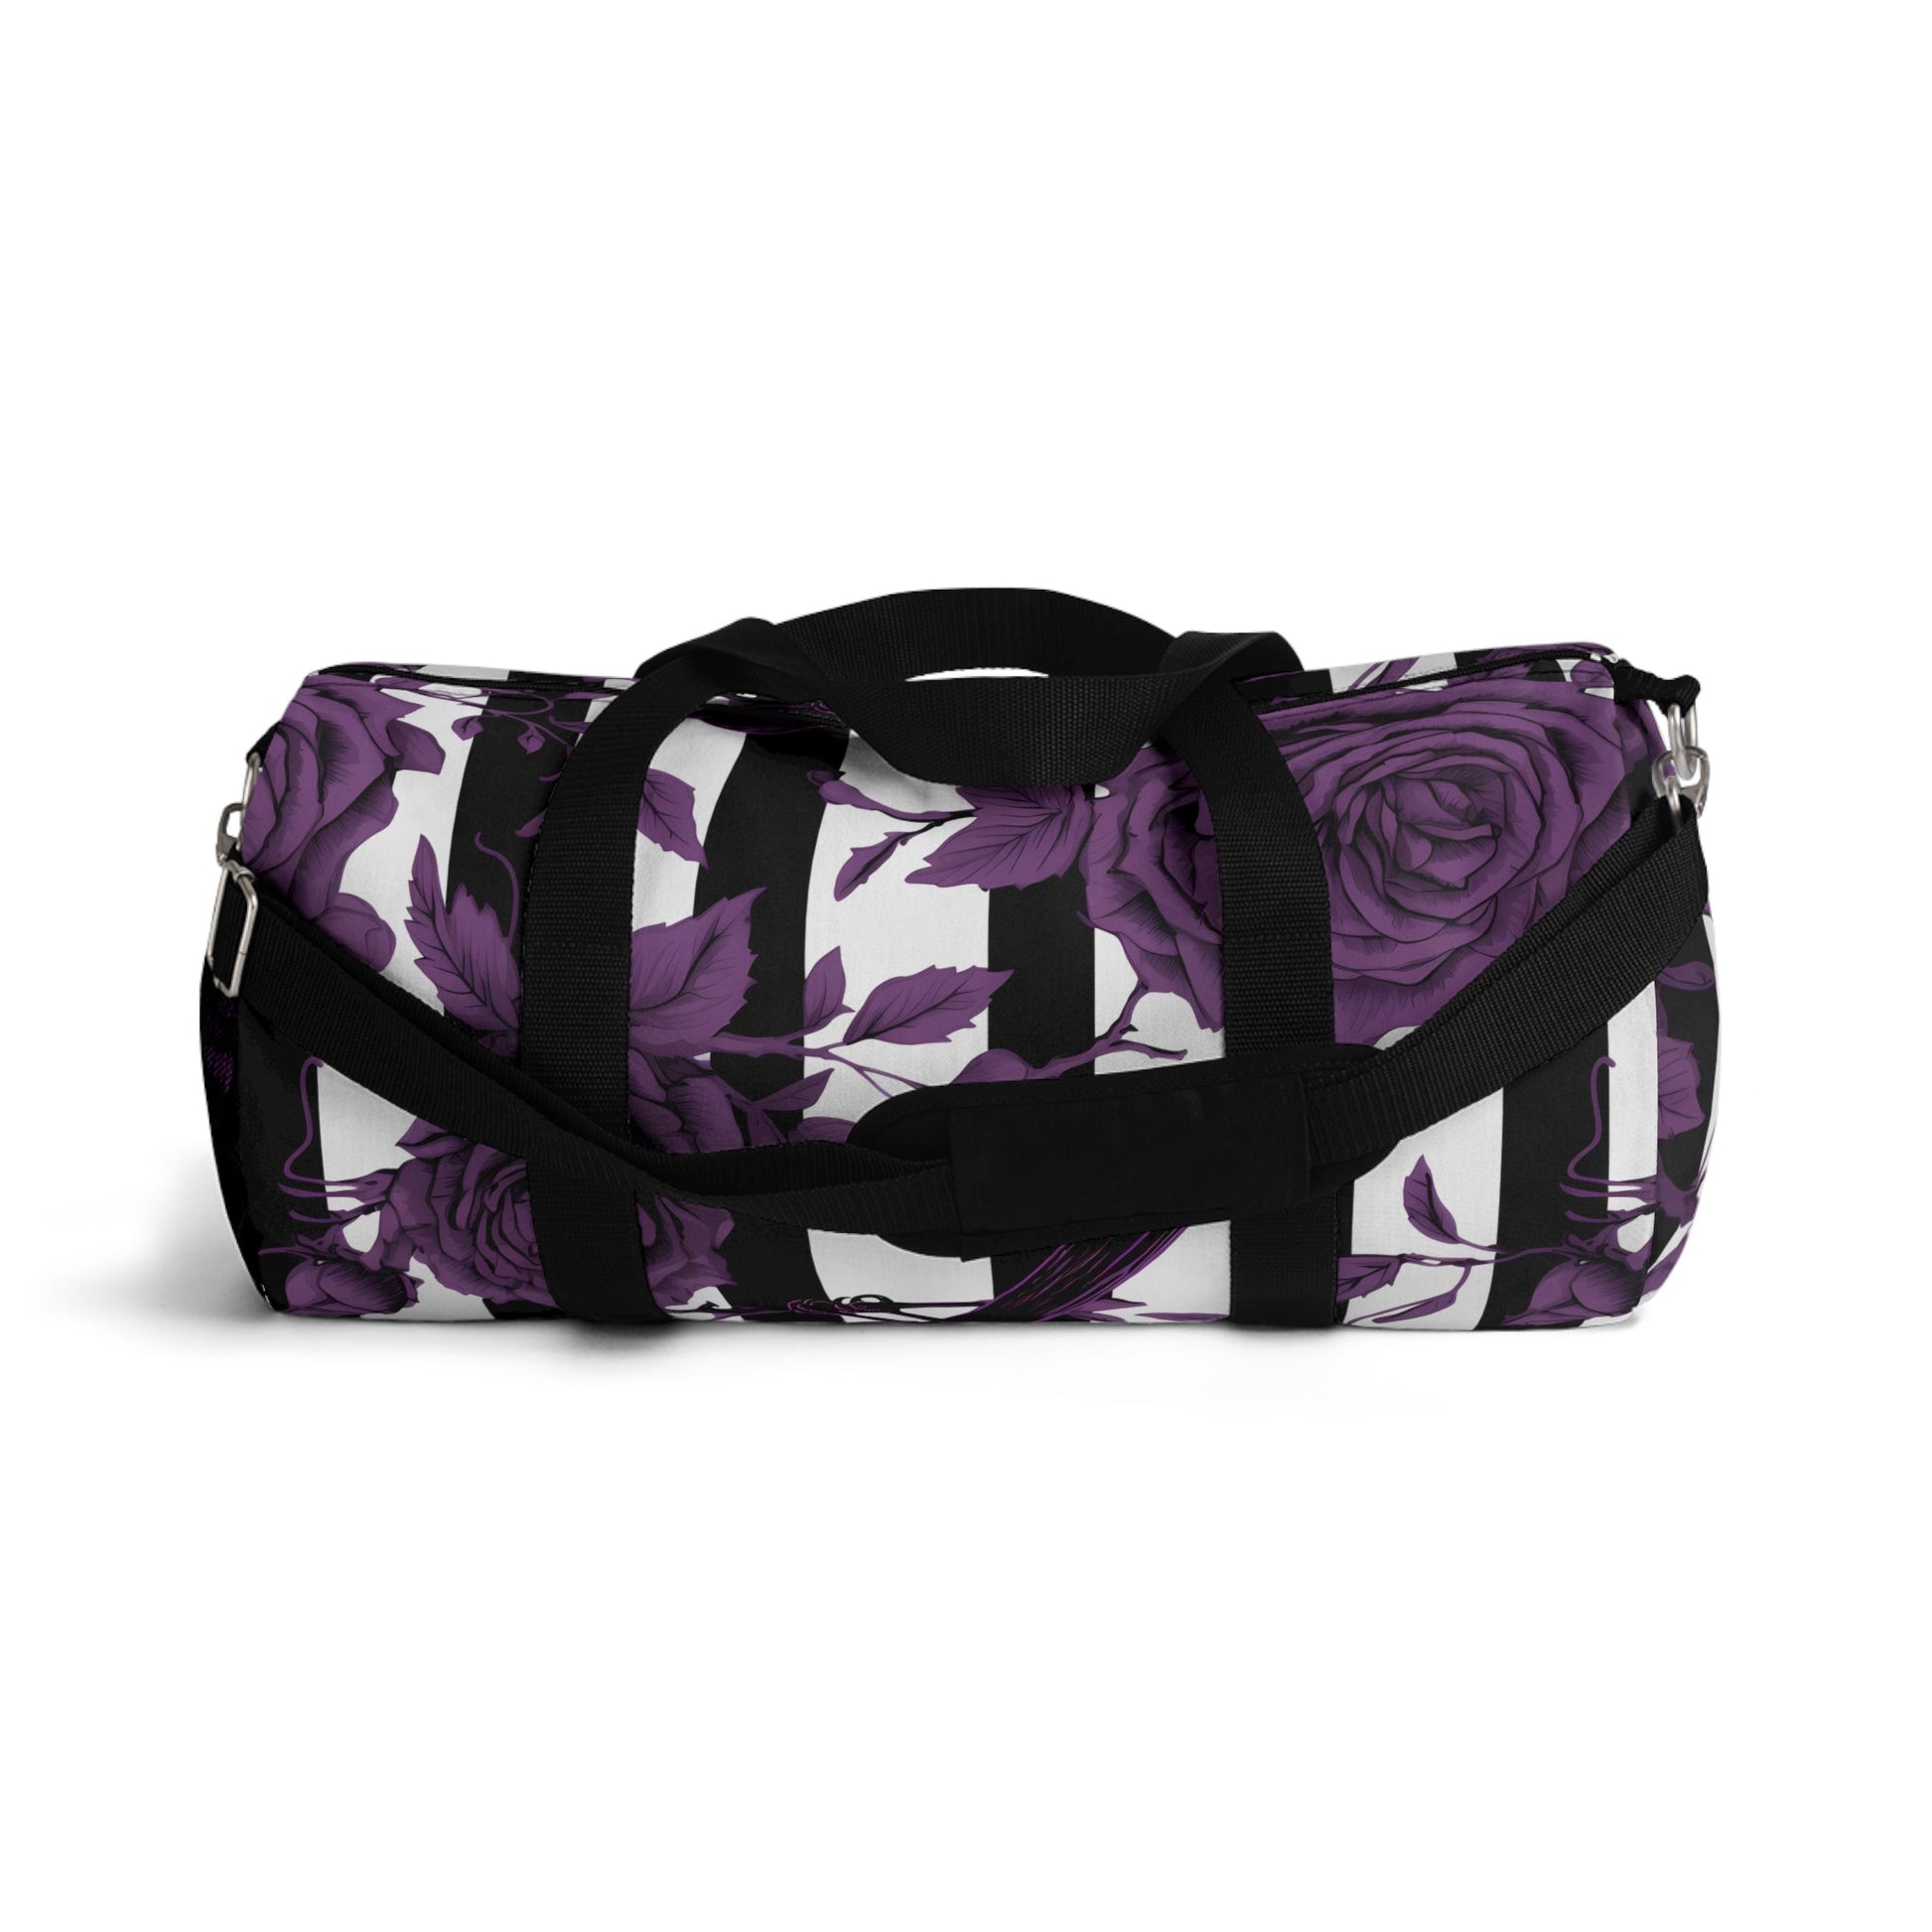 Stripes With Roses and Crows Duffle BagBagsVTZdesignsSmallAccessoriesAll Over PrintAOP